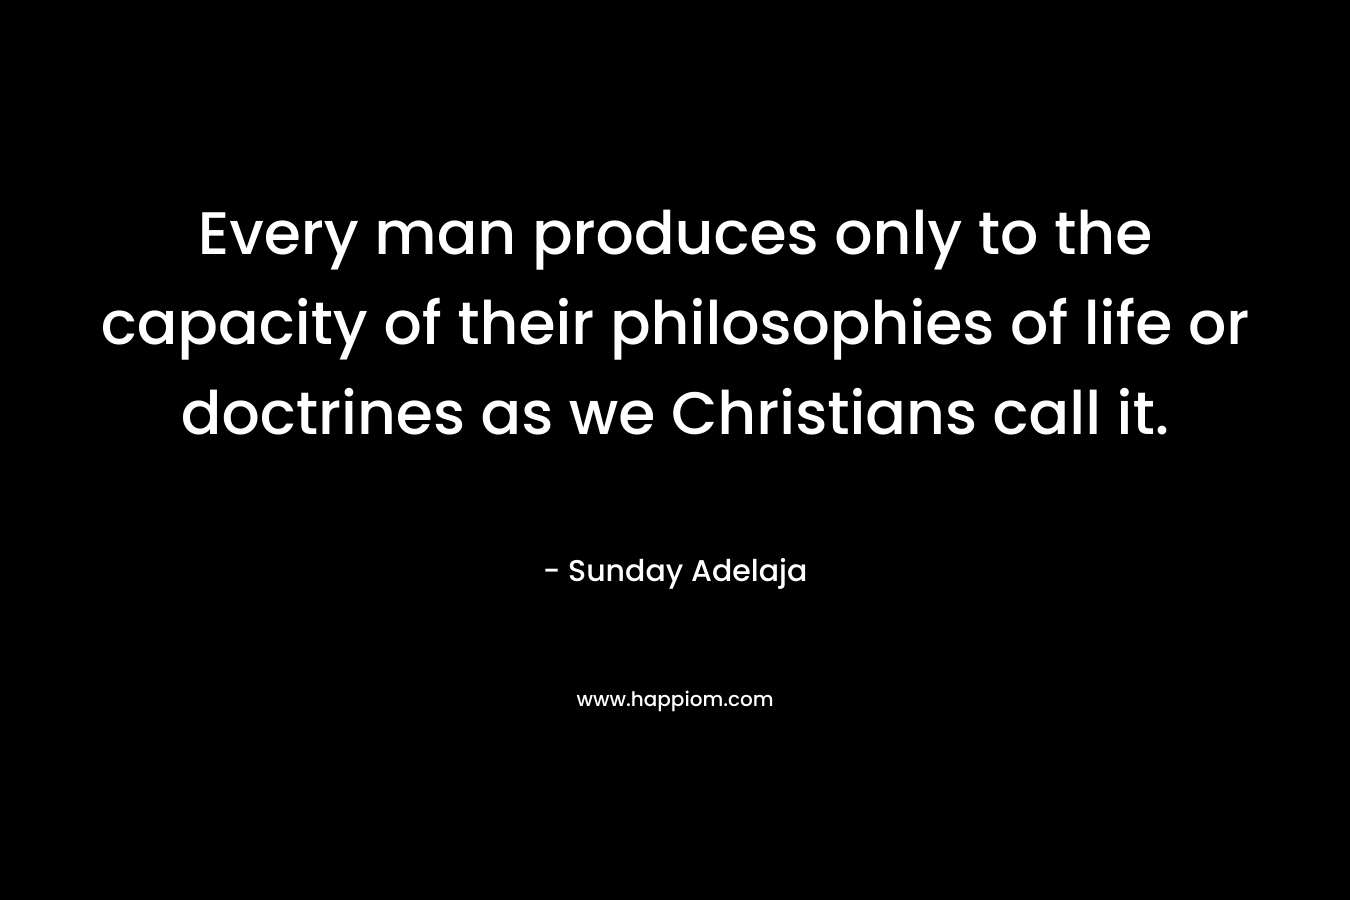 Every man produces only to the capacity of their philosophies of life or doctrines as we Christians call it. – Sunday Adelaja